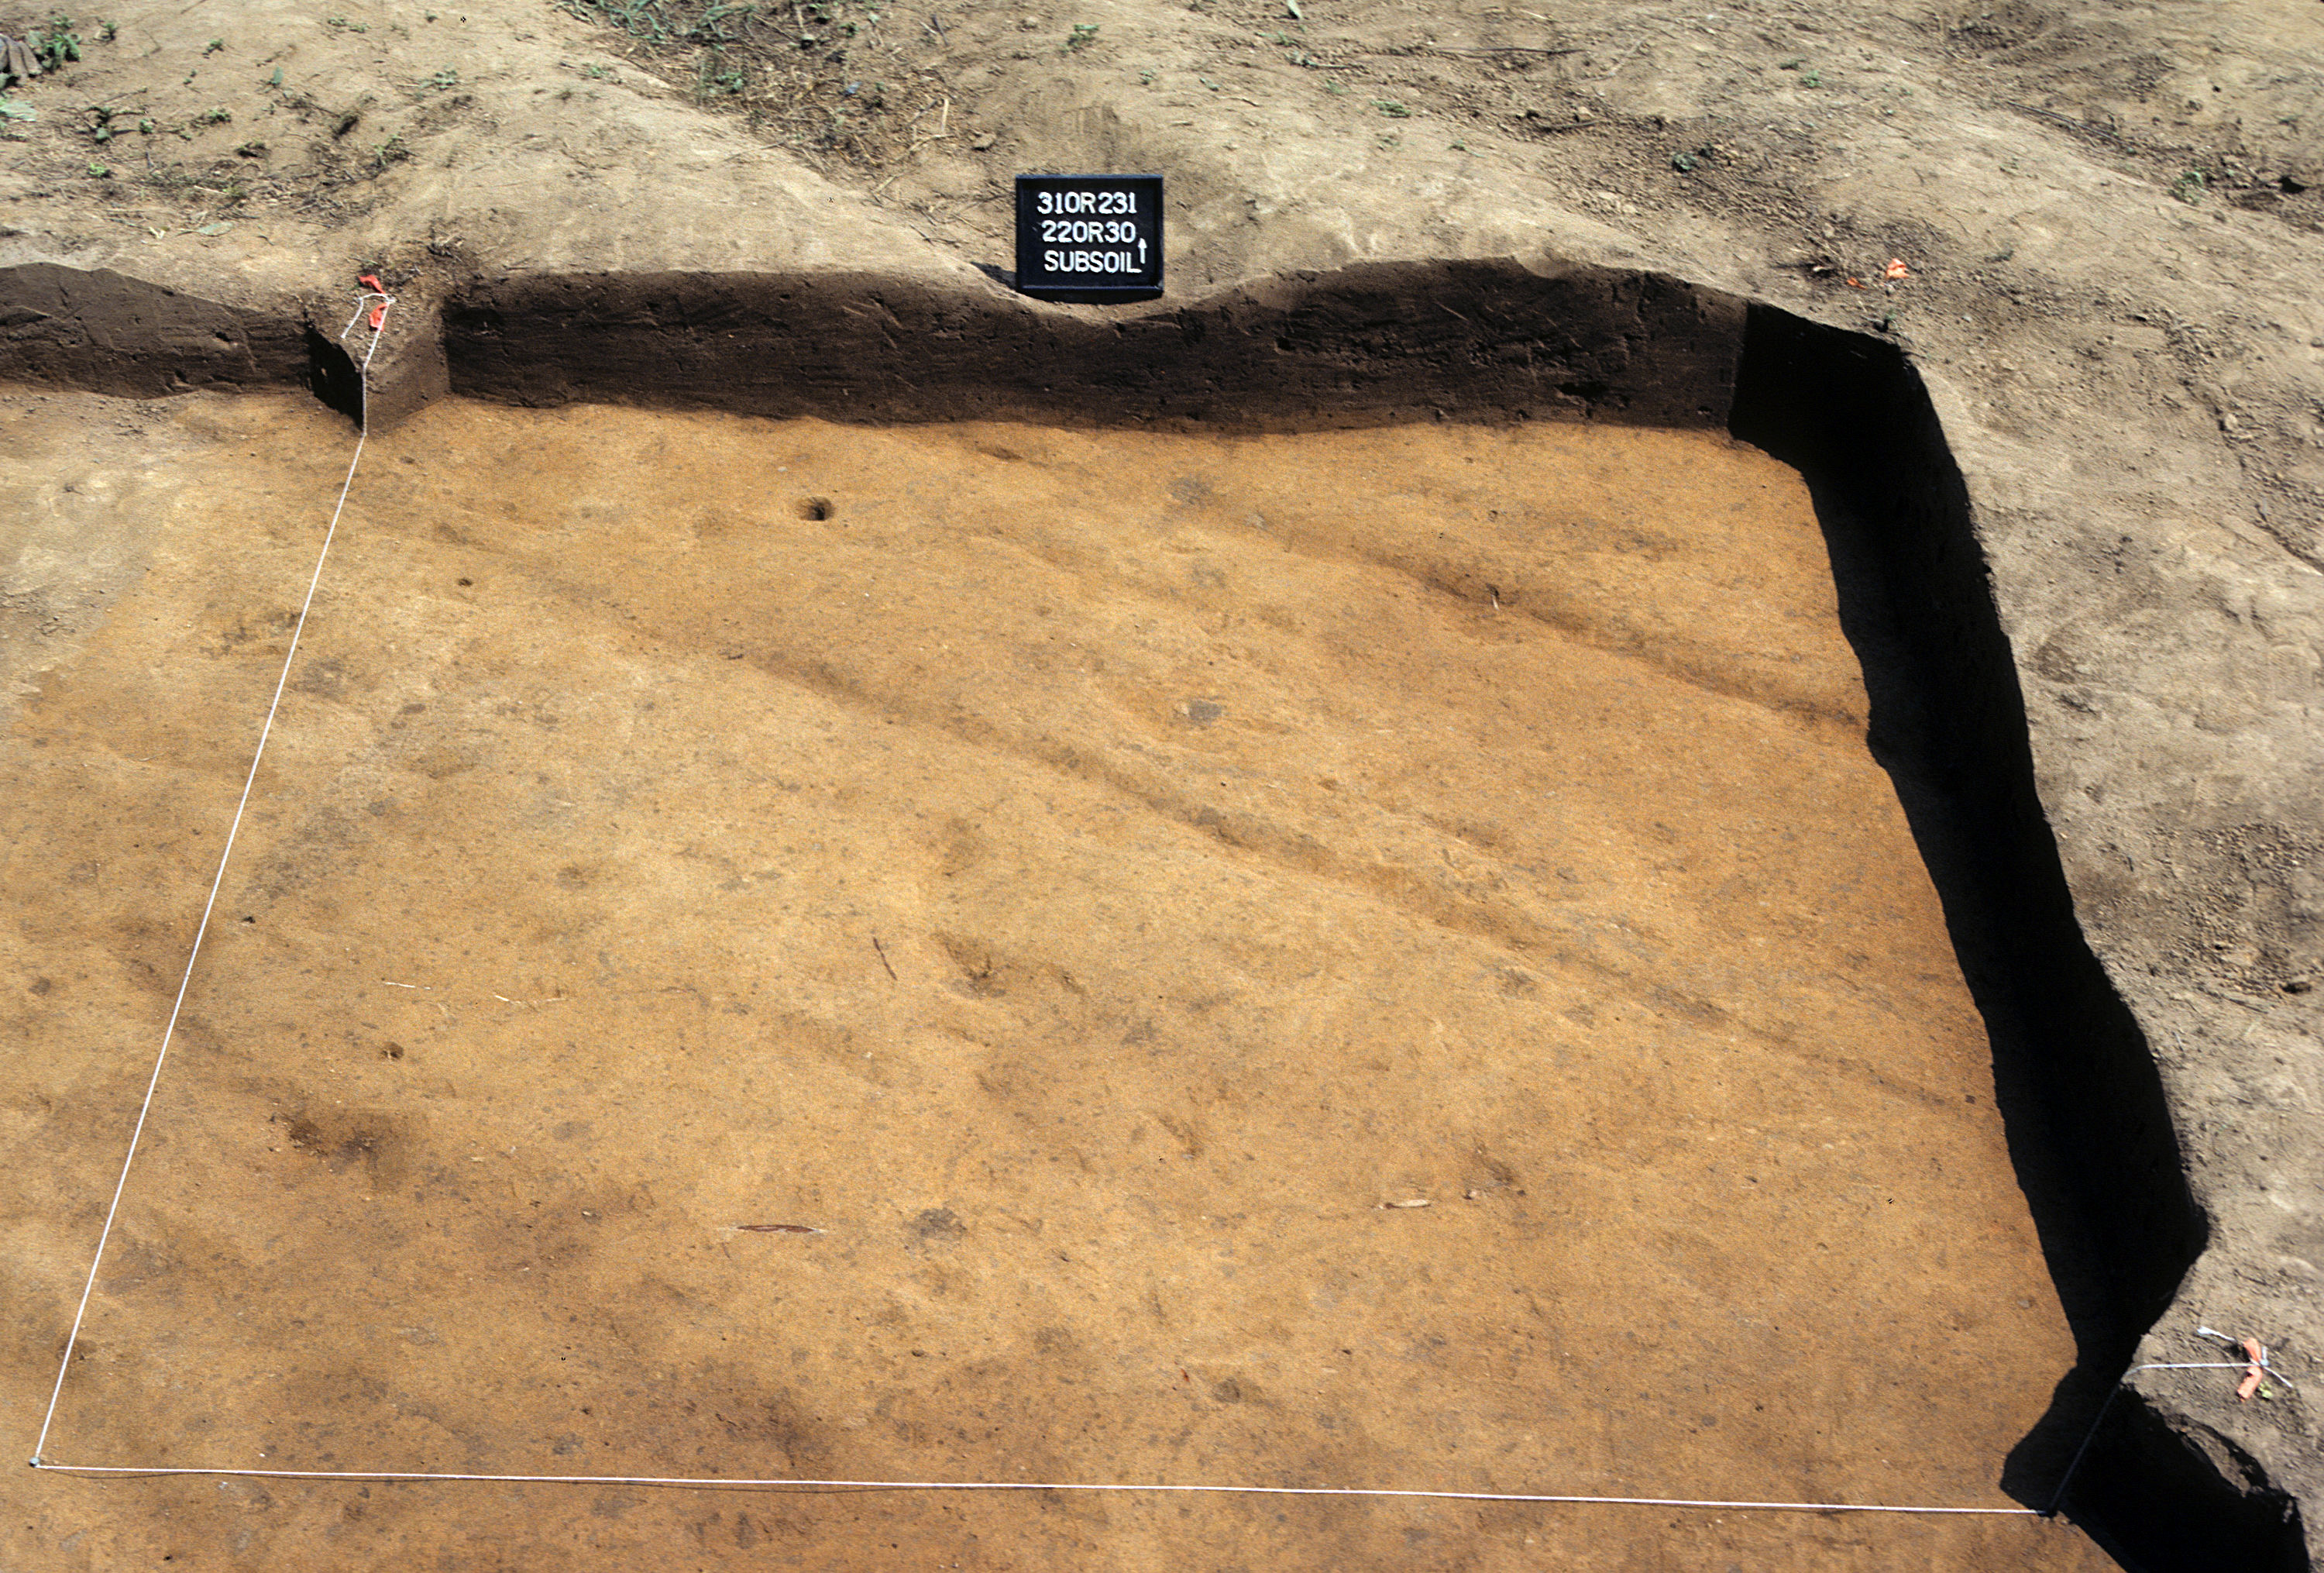 Figure 801. Sq. 220R30 at top of subsoil (view to north).